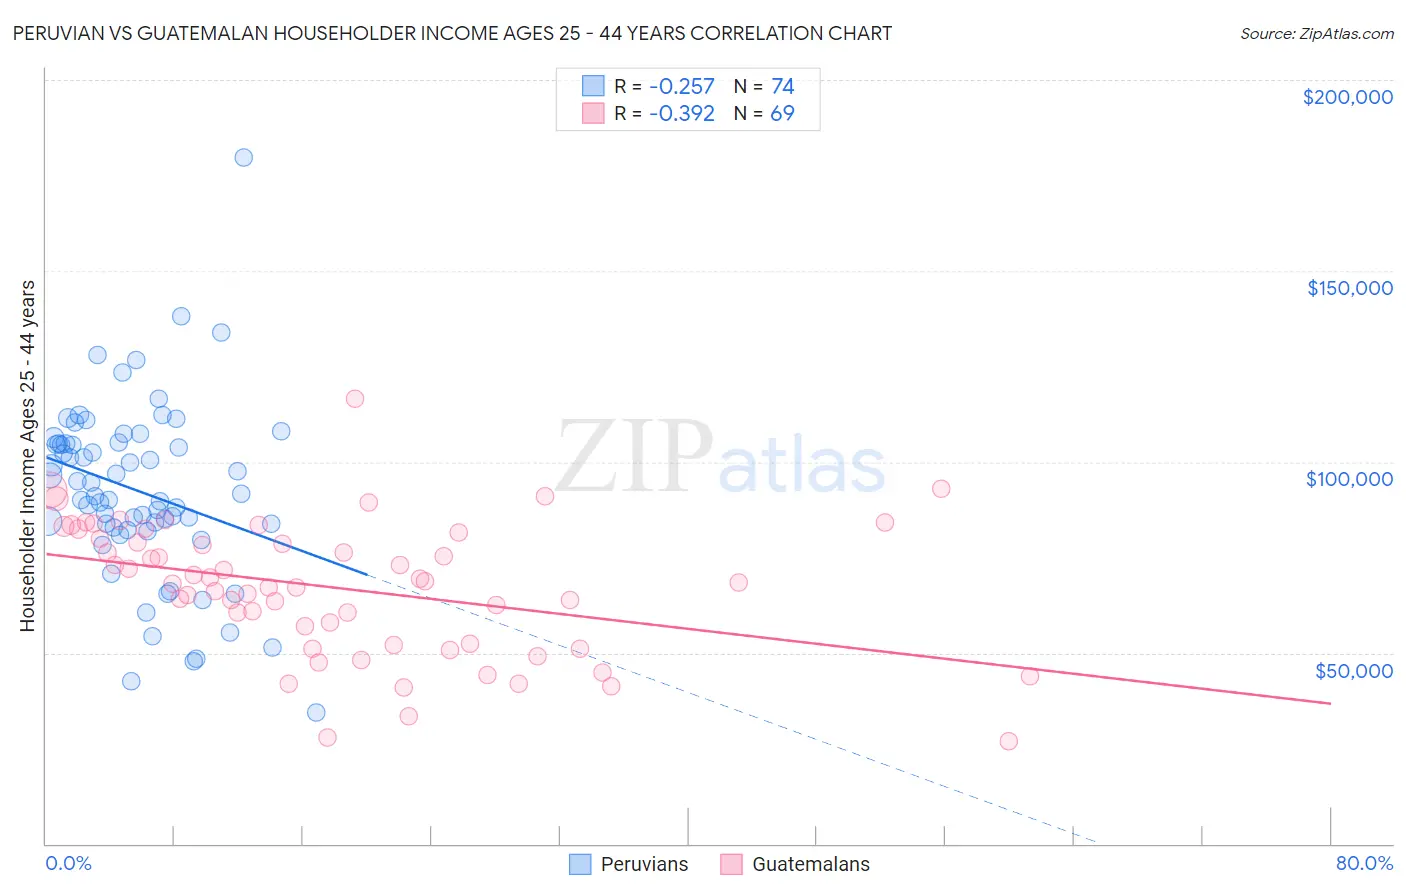 Peruvian vs Guatemalan Householder Income Ages 25 - 44 years